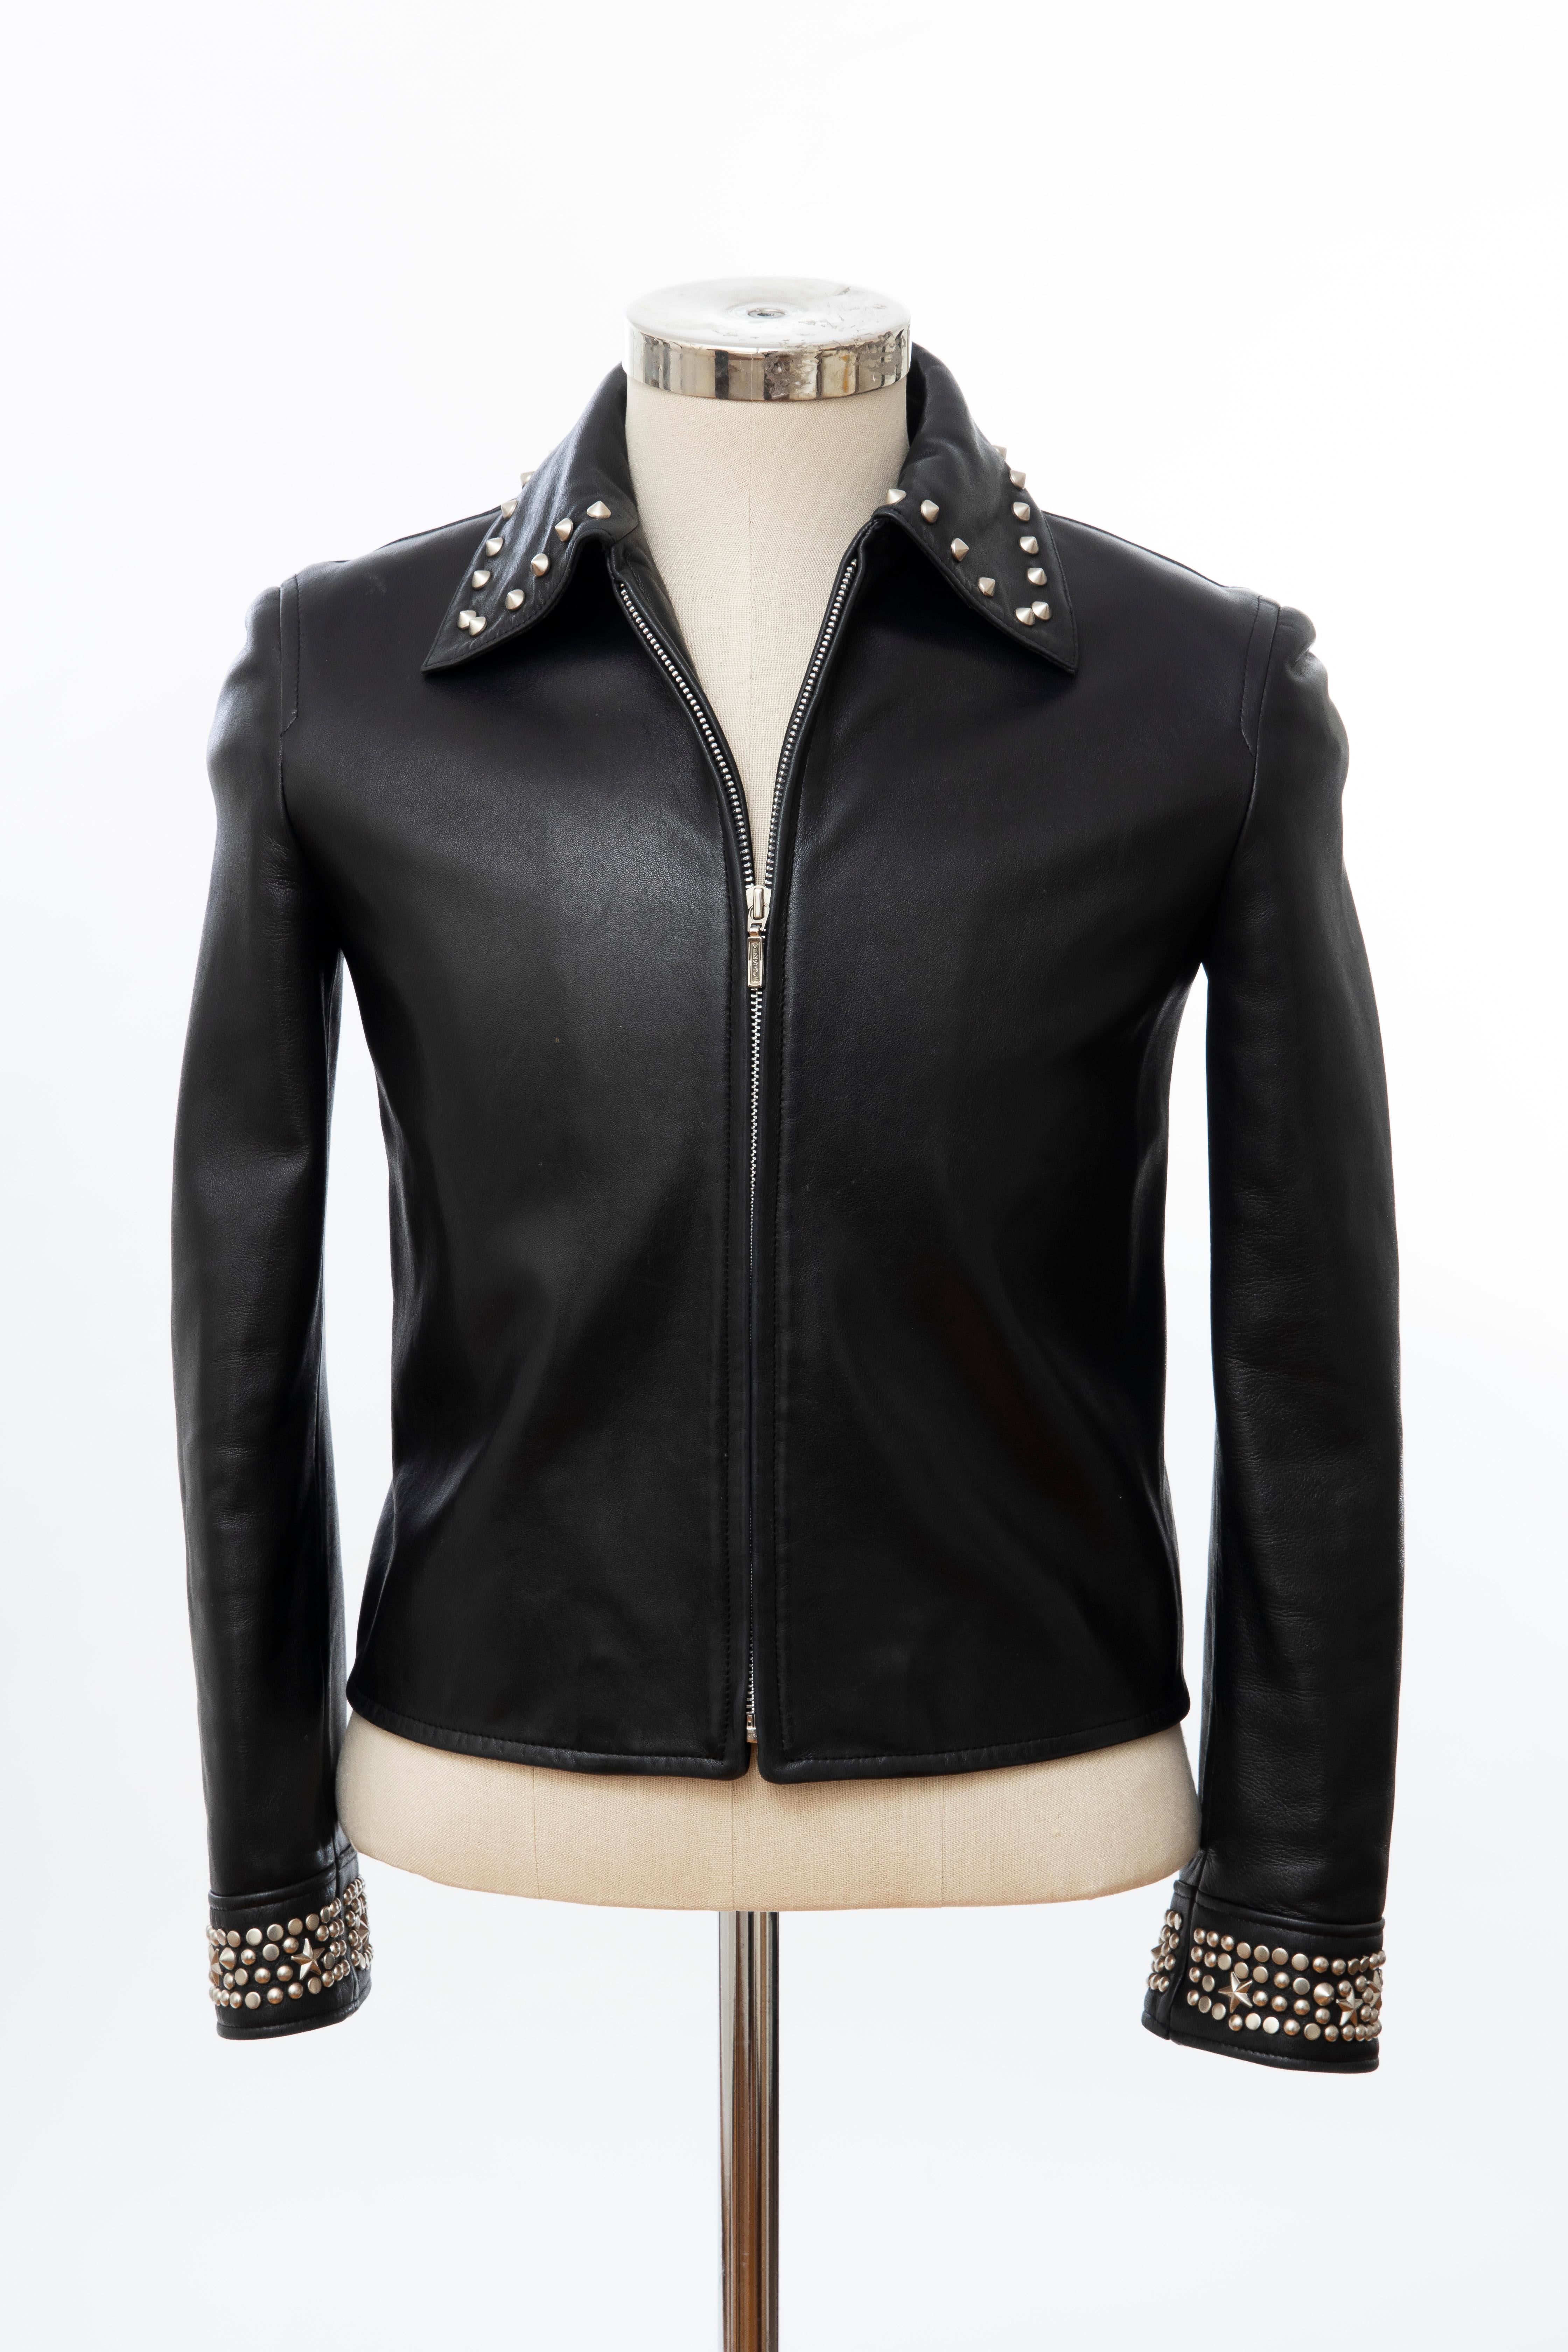 Gianni Versace Black Leather Jacket Pewter Stud Collar & Cuffs,  Circa: 1990's For Sale 8